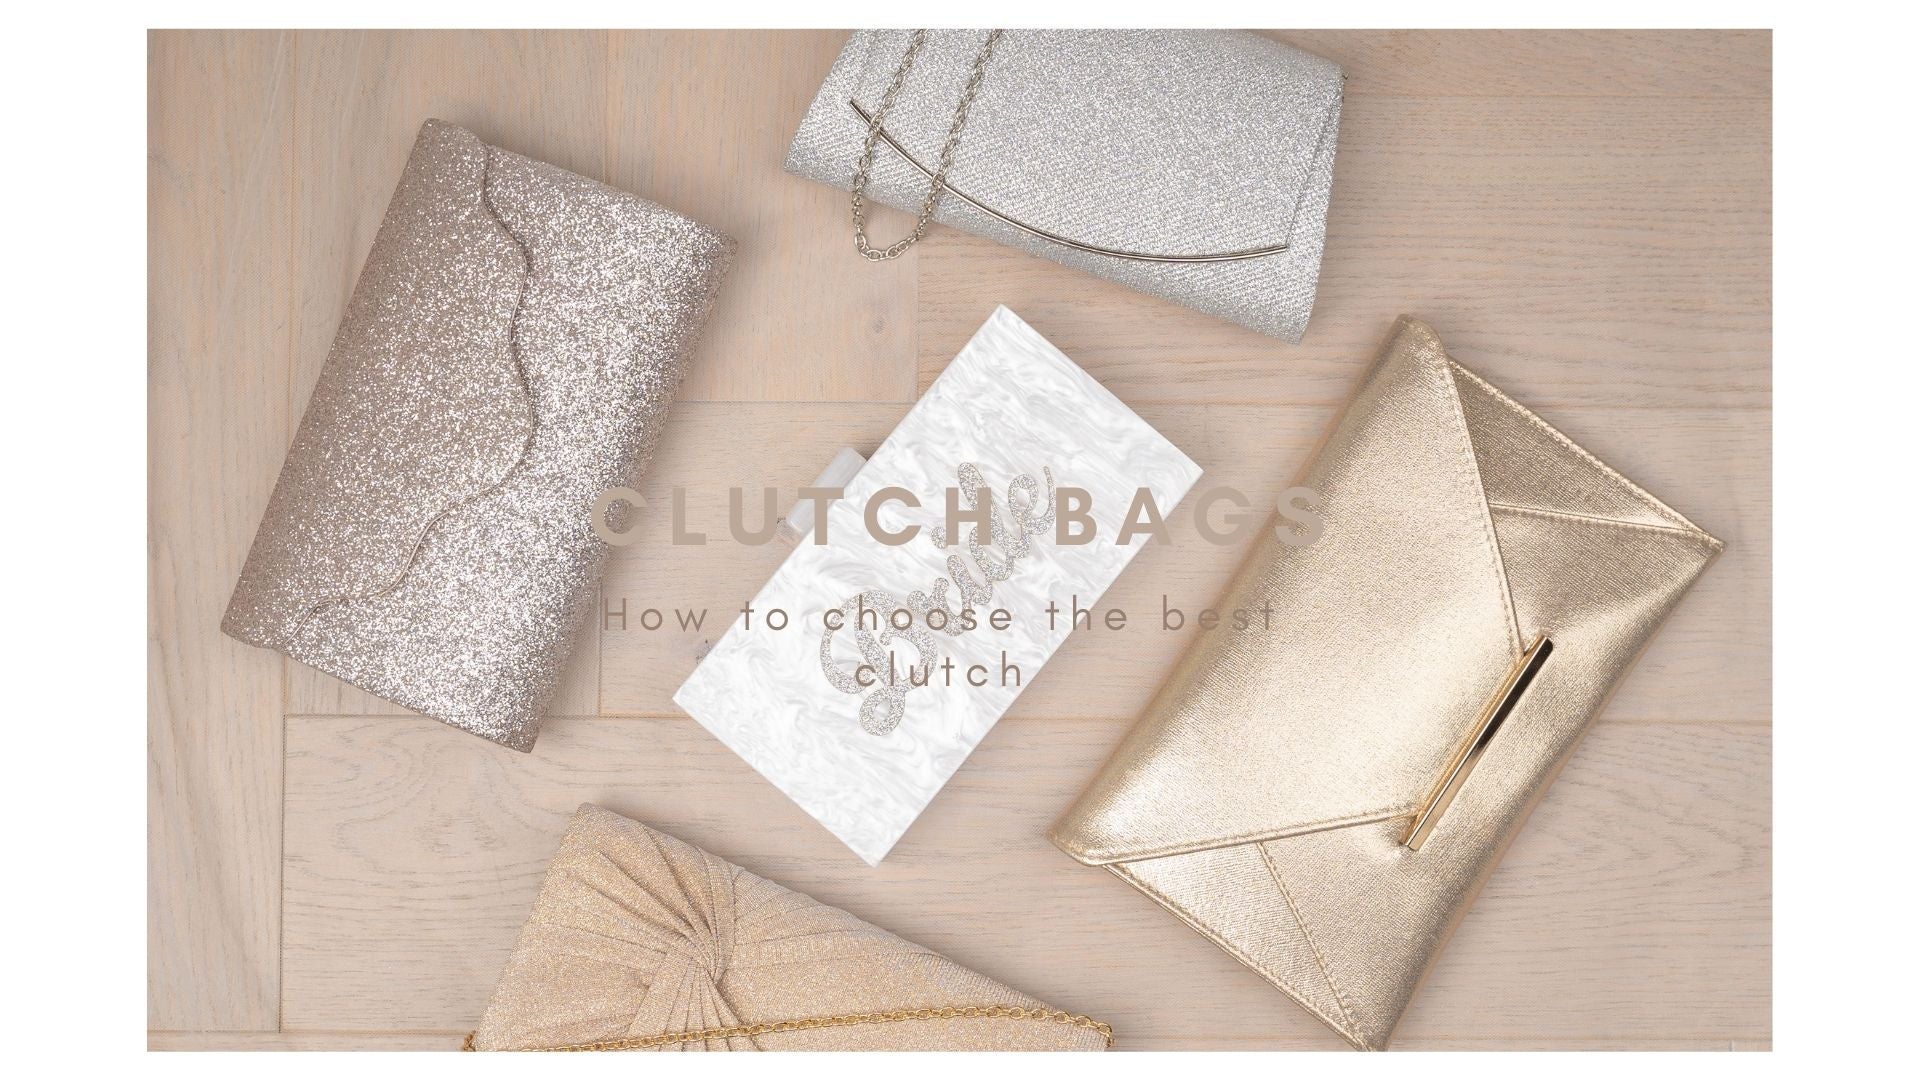 What Clutch Bag Should I Choose For My Special Occasion?